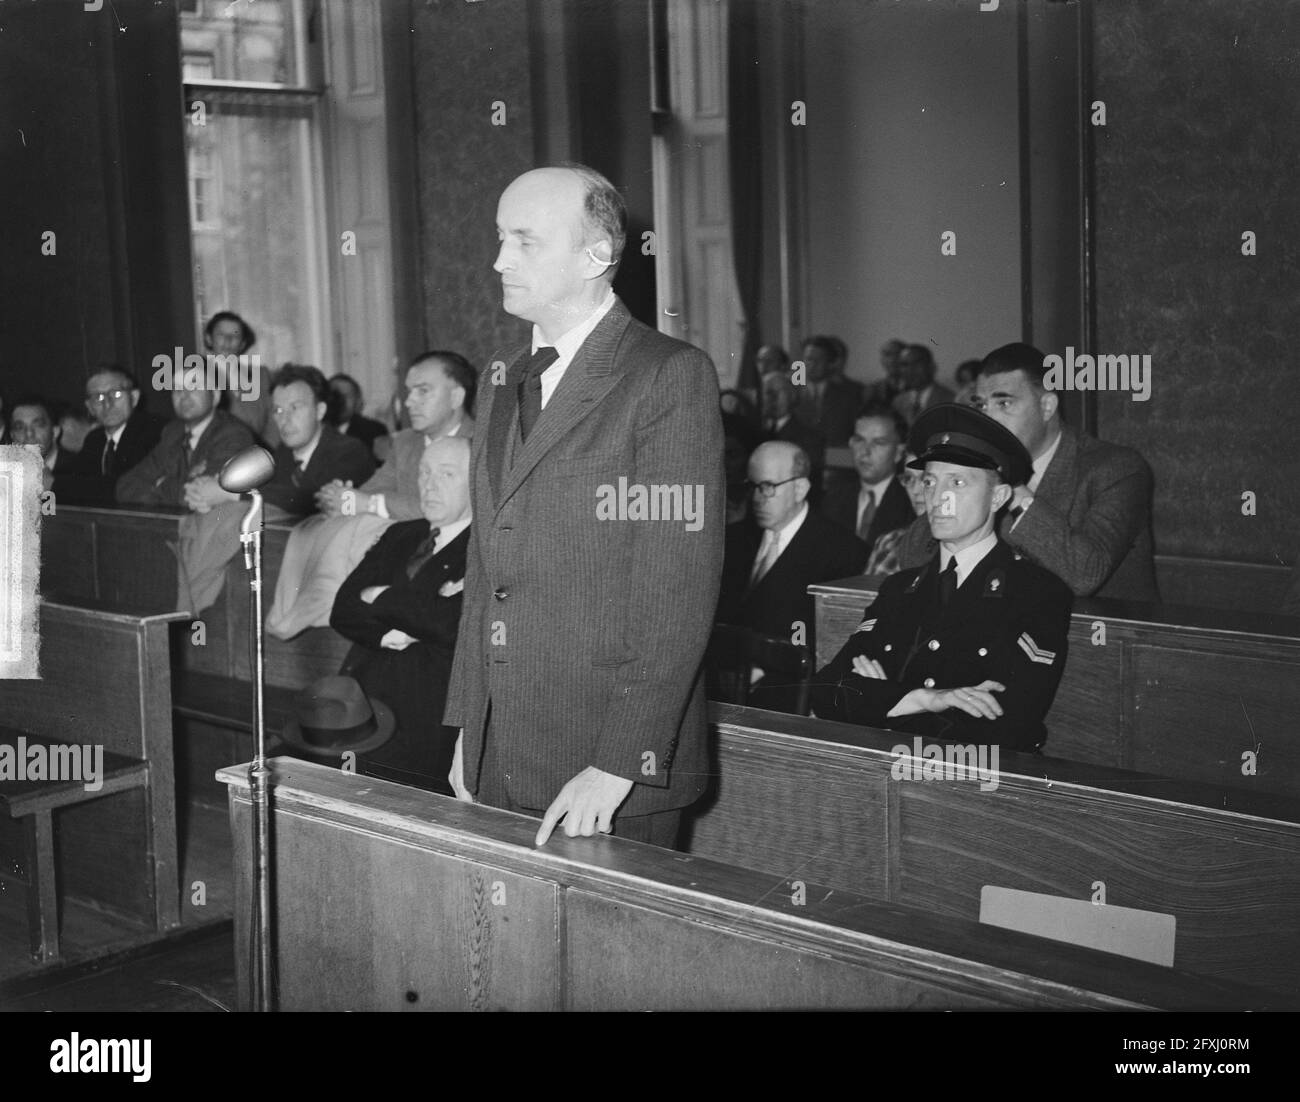 Willy Lages, former head of the Amsterdam Sicherheitsdienst, during a hearing of the Special Court in Amsterdam, 19 July 1949, war criminals, trials, Second World War, The Netherlands, 20th century press agency photo, news to remember, documentary, historic photography 1945-1990, visual stories, human history of the Twentieth Century, capturing moments in time Stock Photo